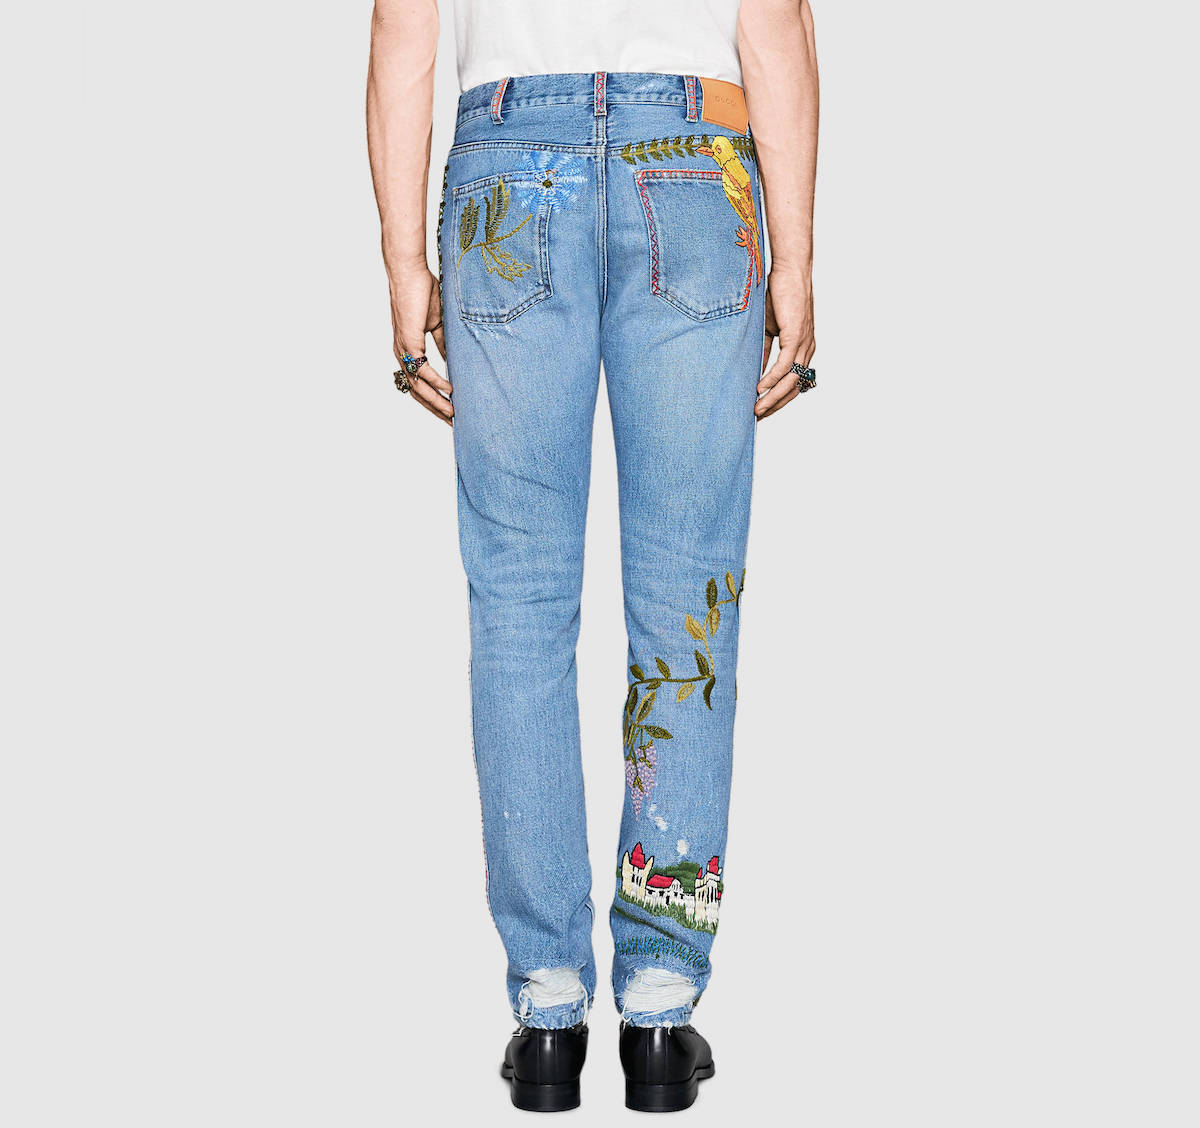 gucci-light-embroidered-denim-jeans-3